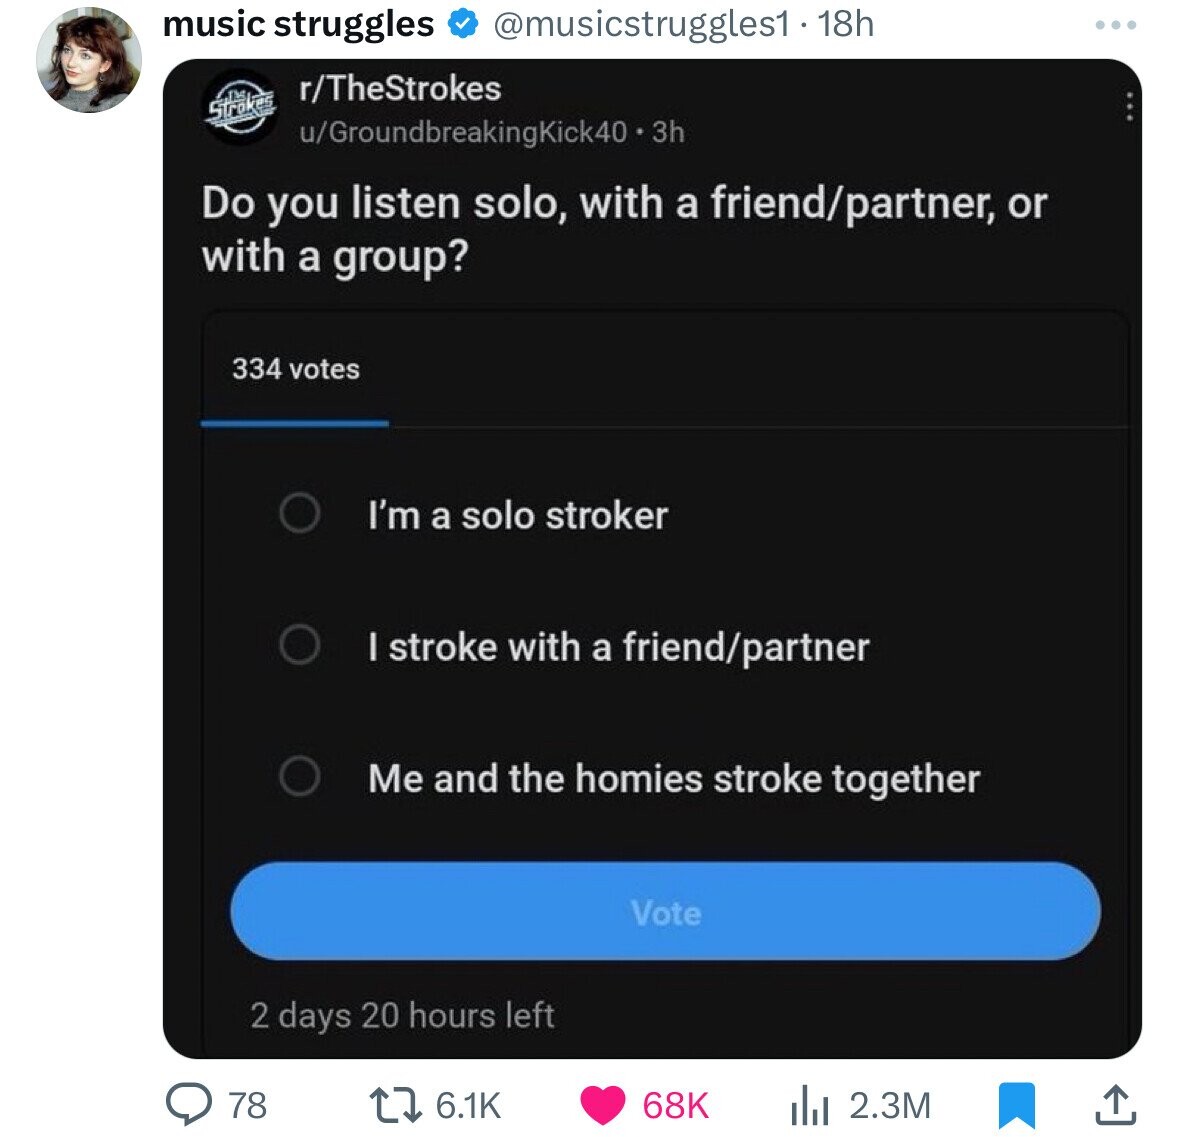 software - music struggles 18h rTheStrokes Stroke uGroundbreakingKick40.3h Do you listen solo, with a friendpartner, or with a group? 334 votes I'm a solo stroker 78 I stroke with a friendpartner Me and the homies stroke together 2 days Vote 68K 2.3M